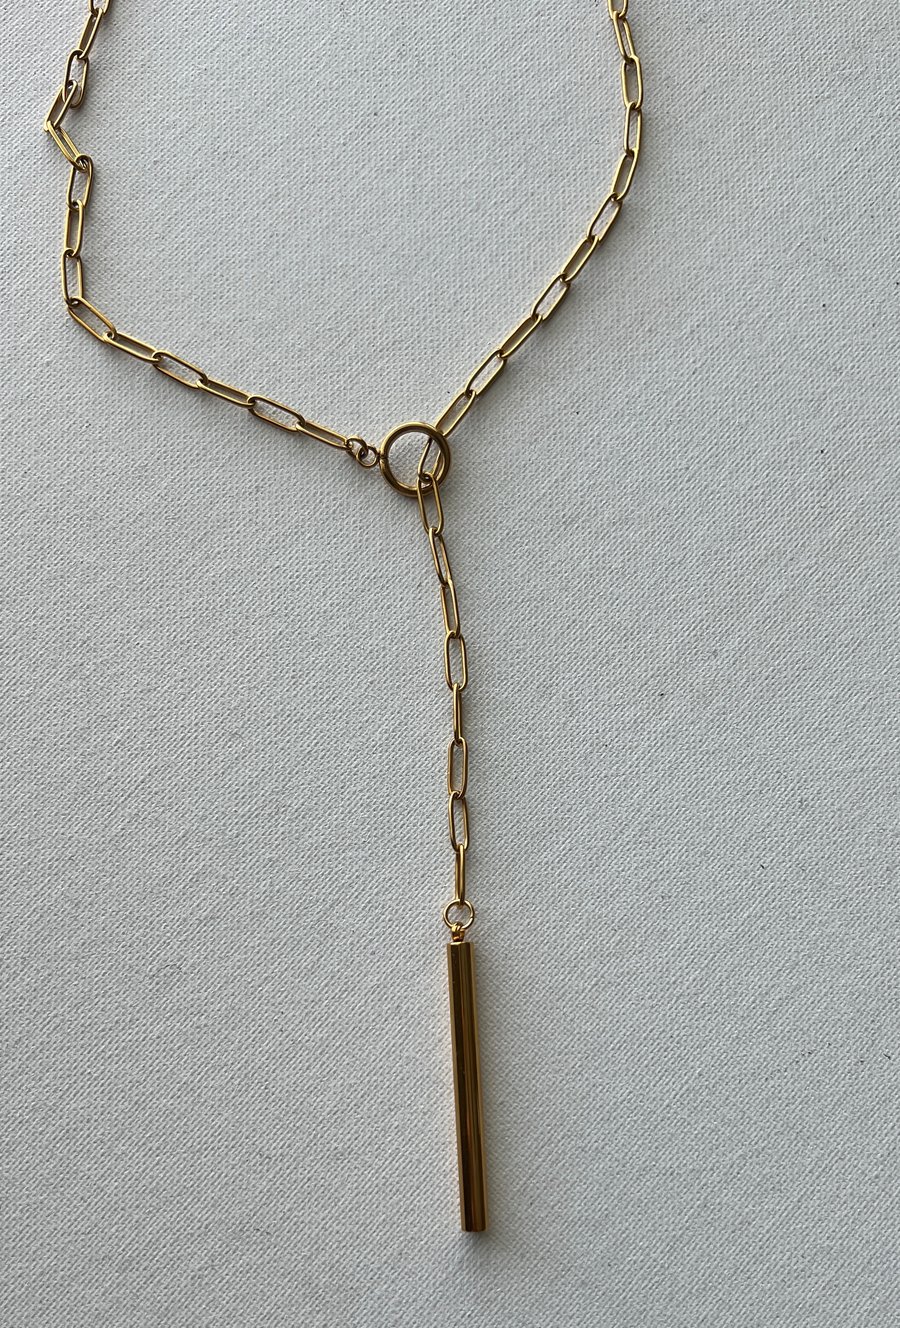 Image of OMA • Gold Lariat Necklace